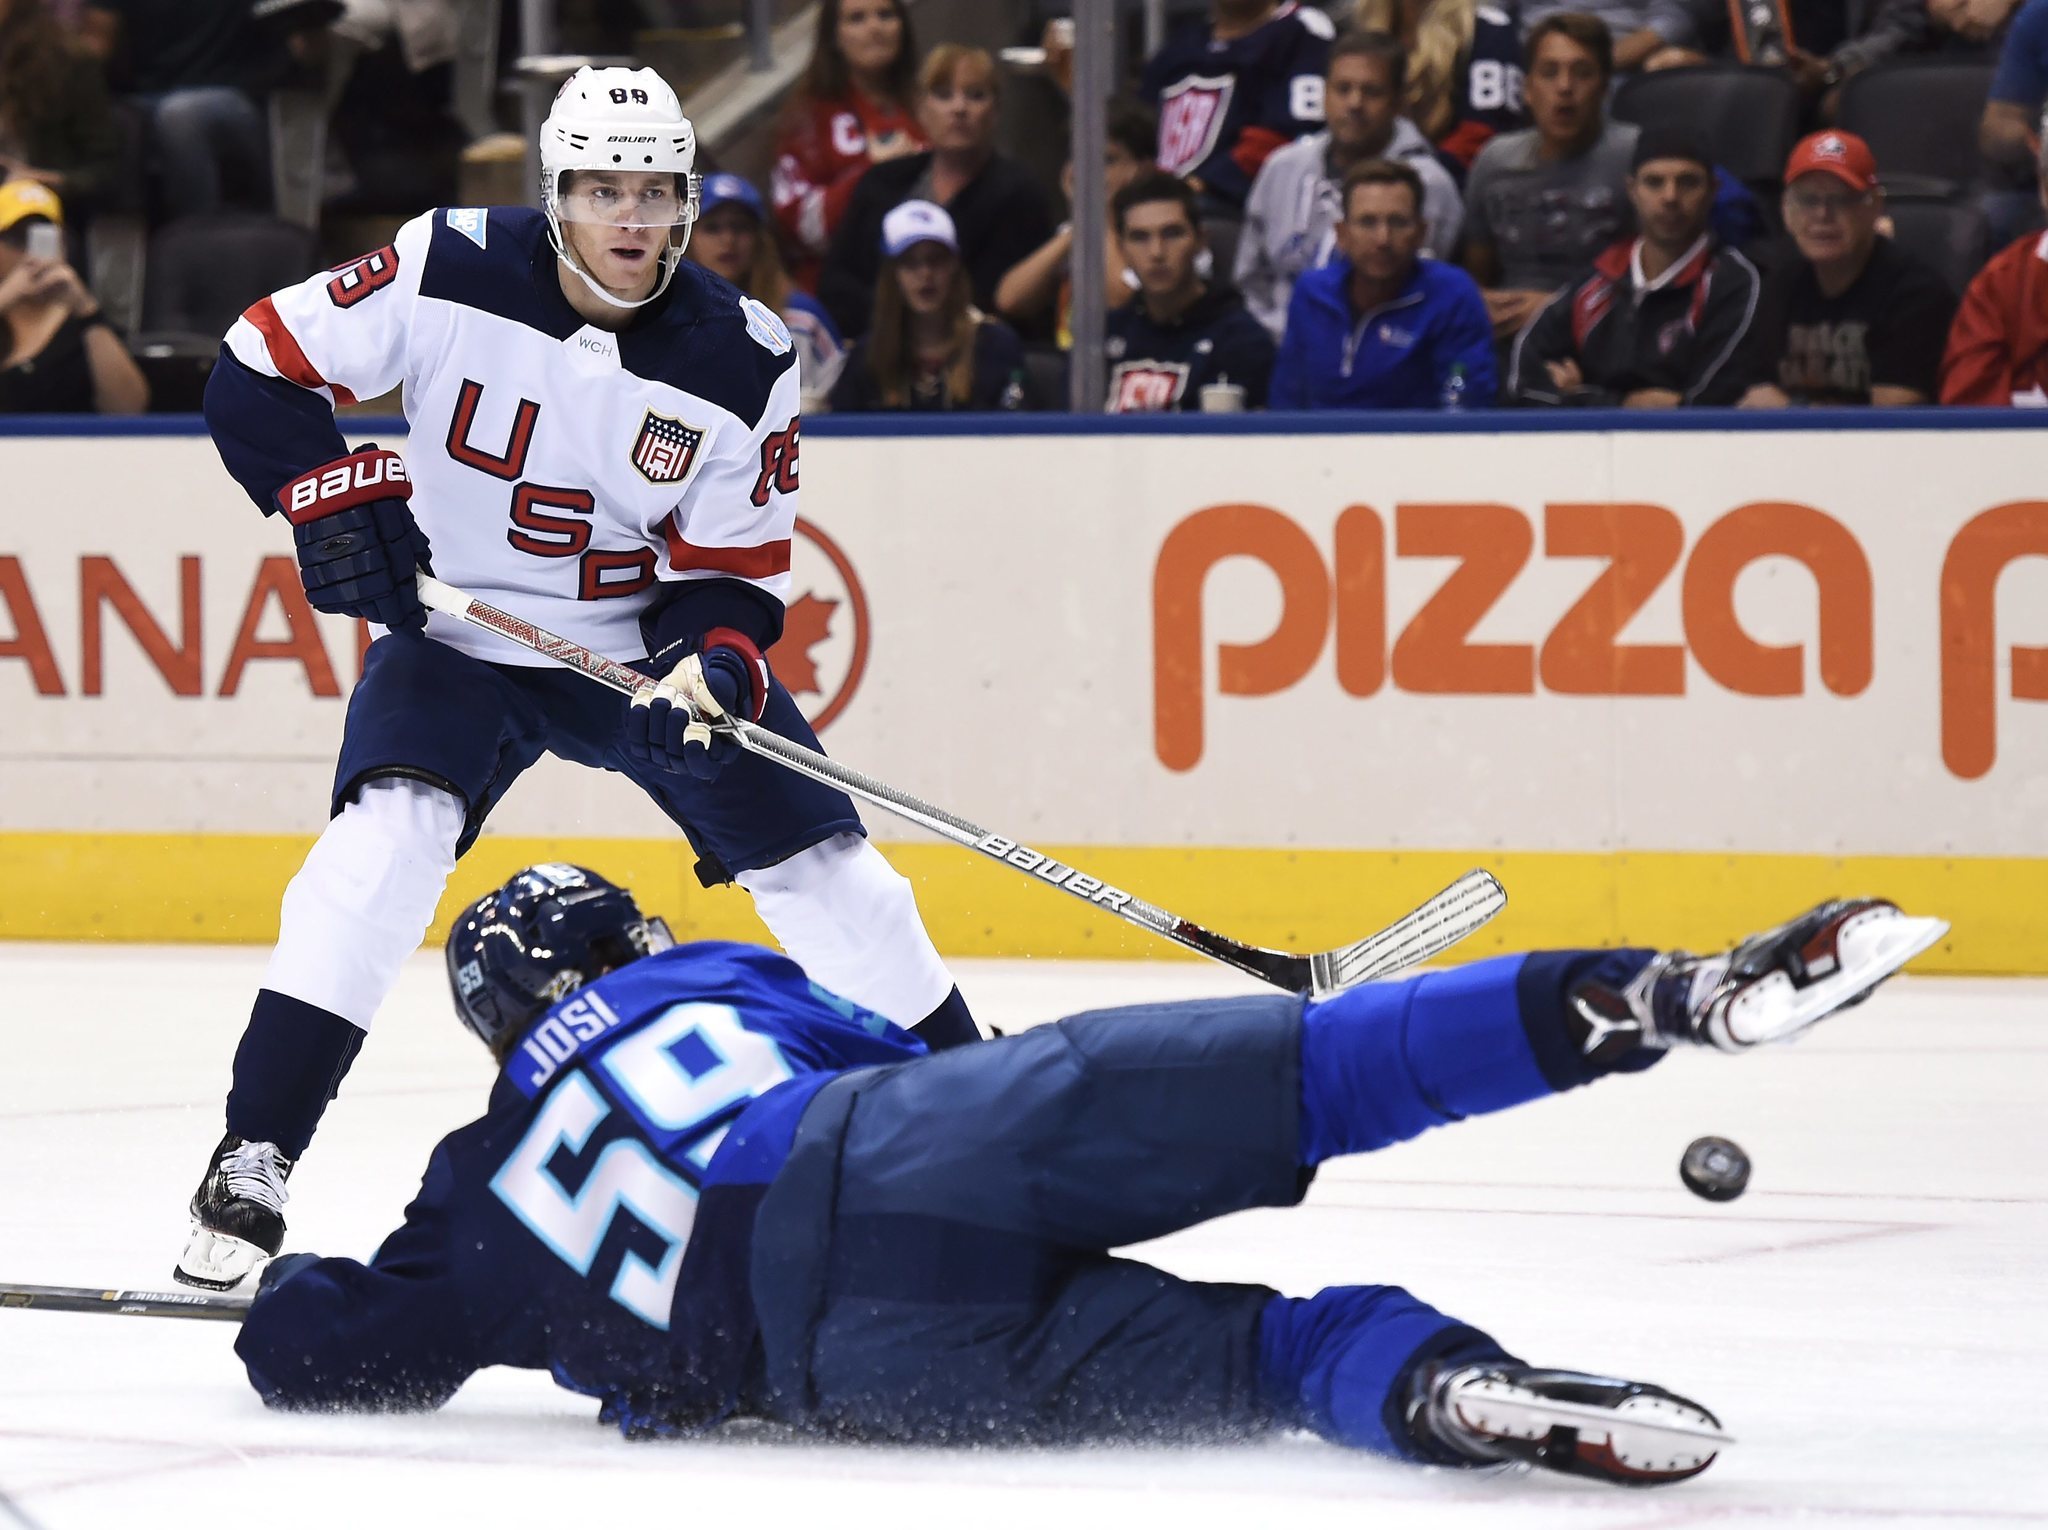 Stunning U.S. loss to Europe shows need for Patrick Kane to take control - Chicago Tribune